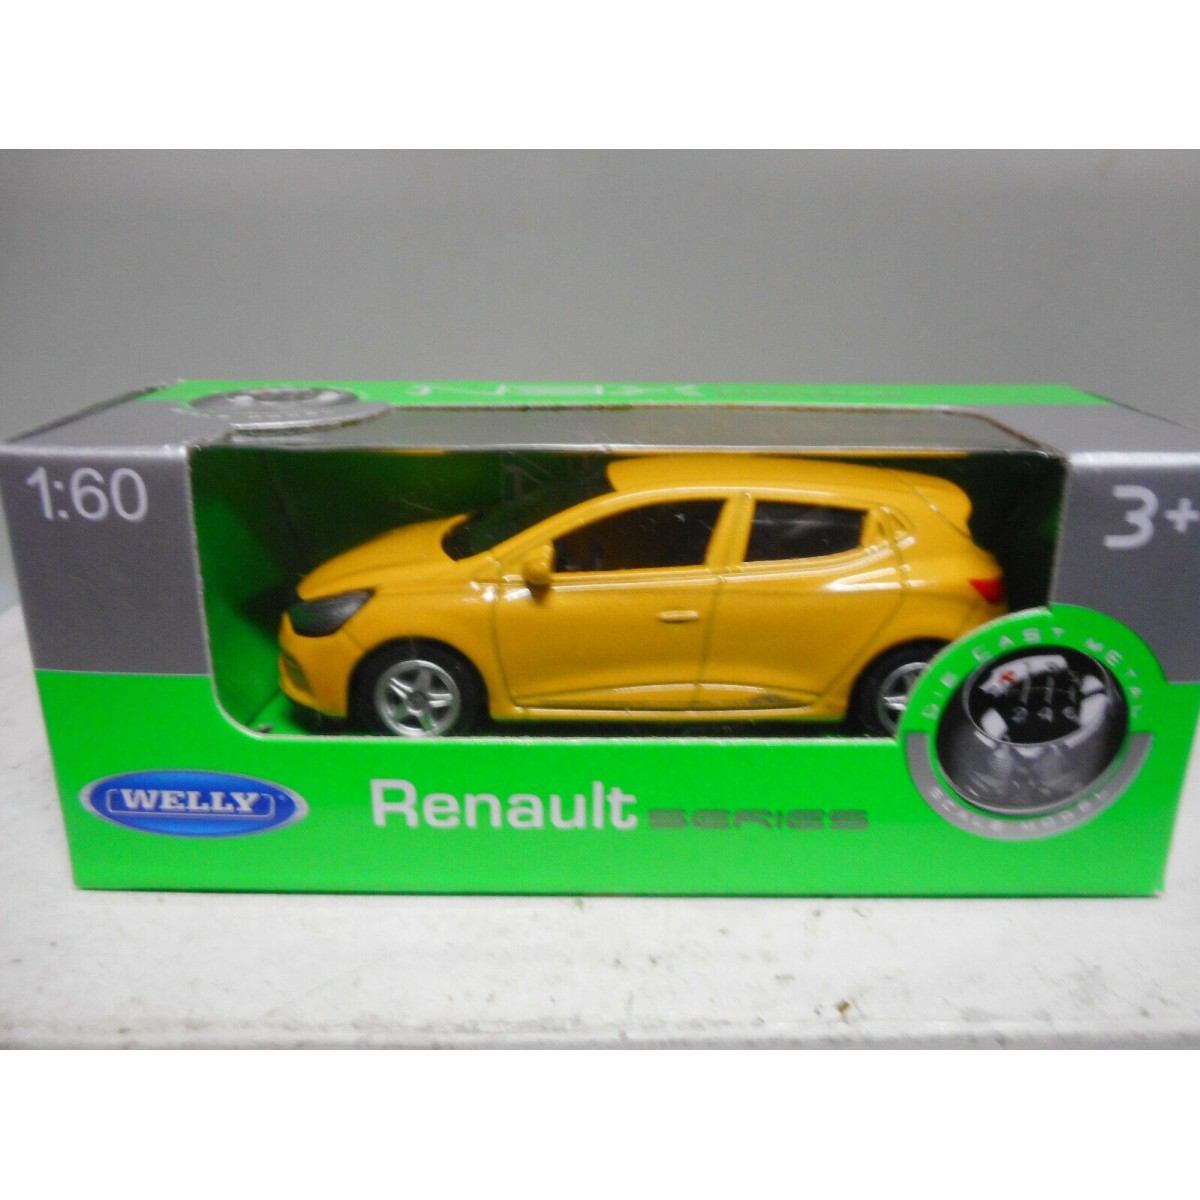 RENAULT CLIO RS YELLOW WELLY 1:60 - BCN STOCK